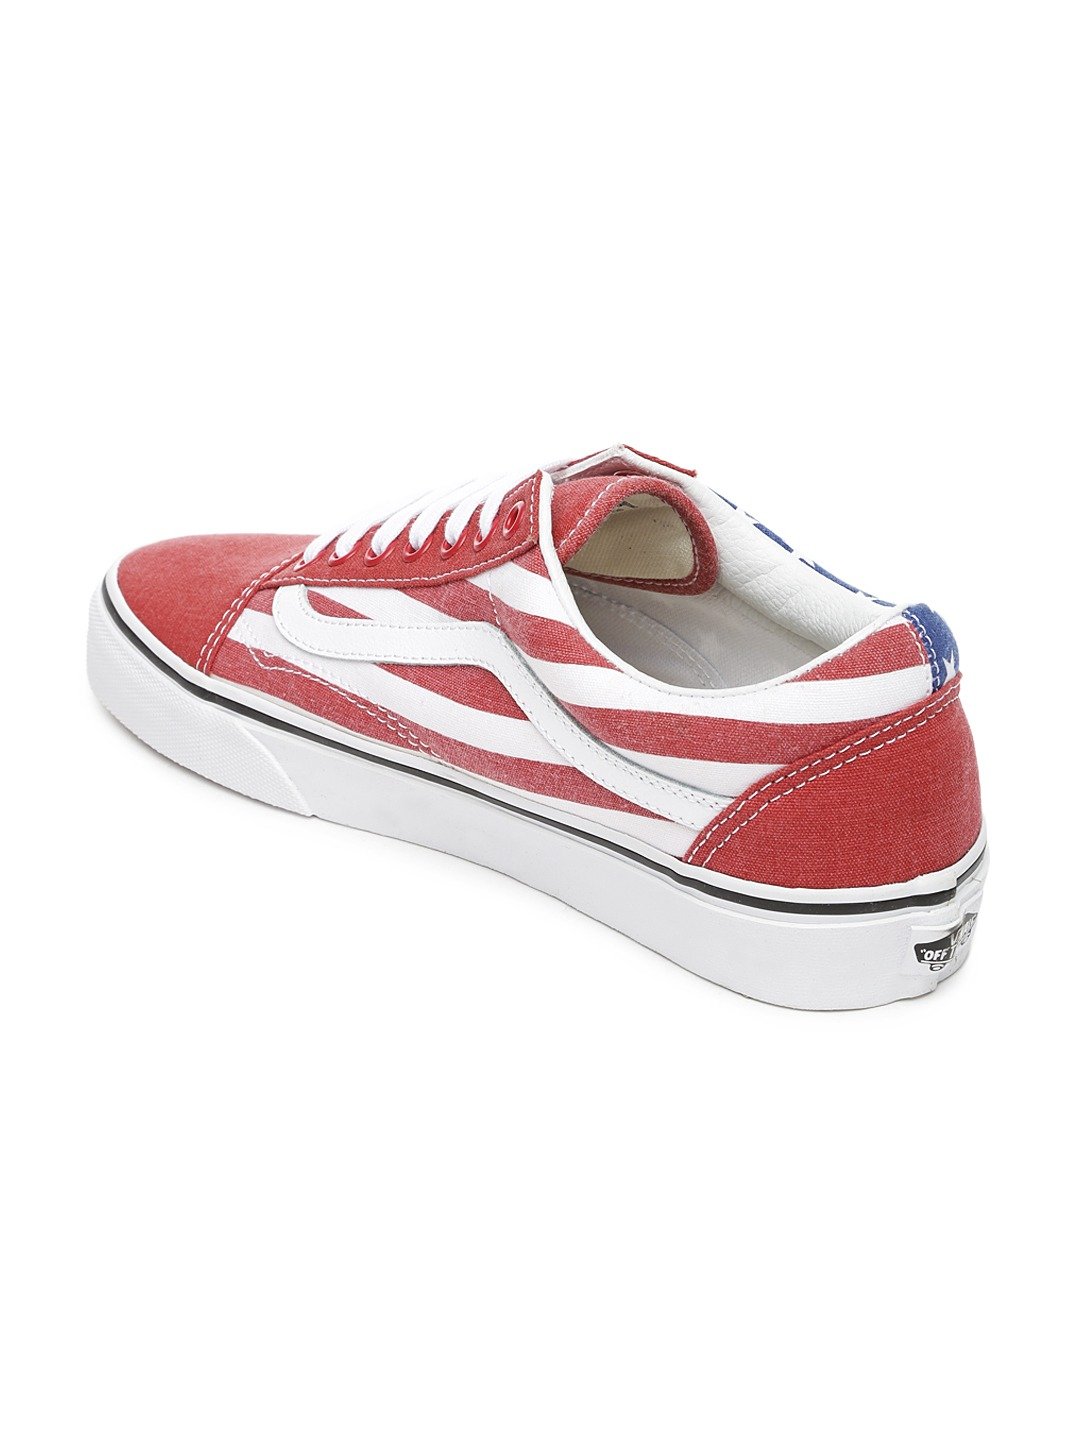 Red & Blue Old Skool Casual Shoes - Discount Store